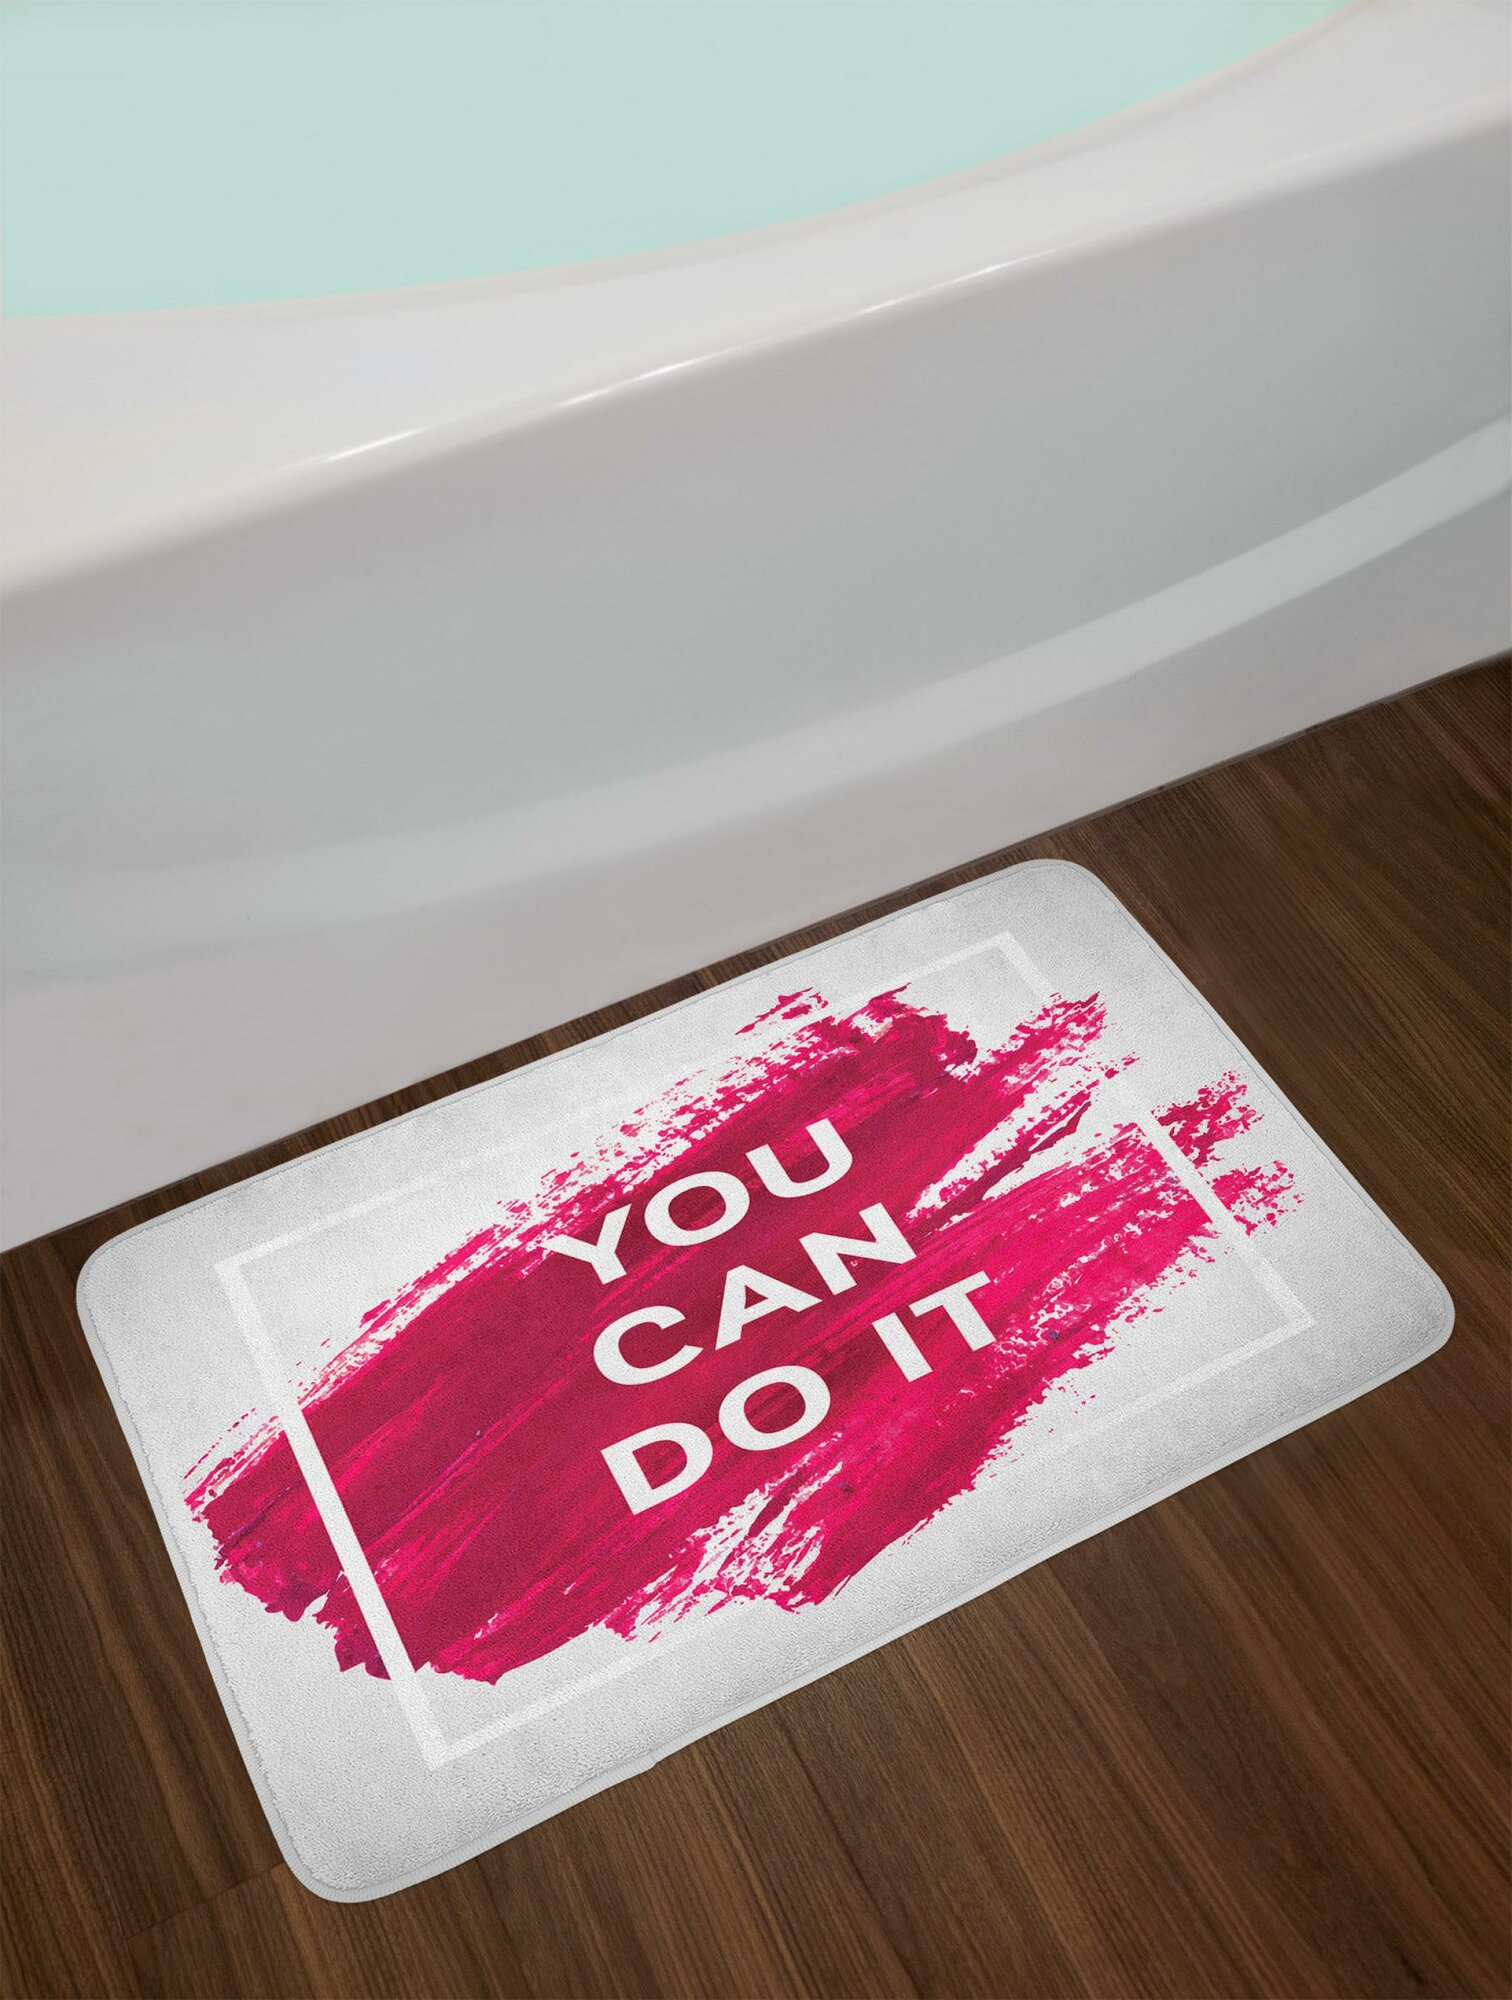 Motivational You Can Do It Typography on Acrylic Paint